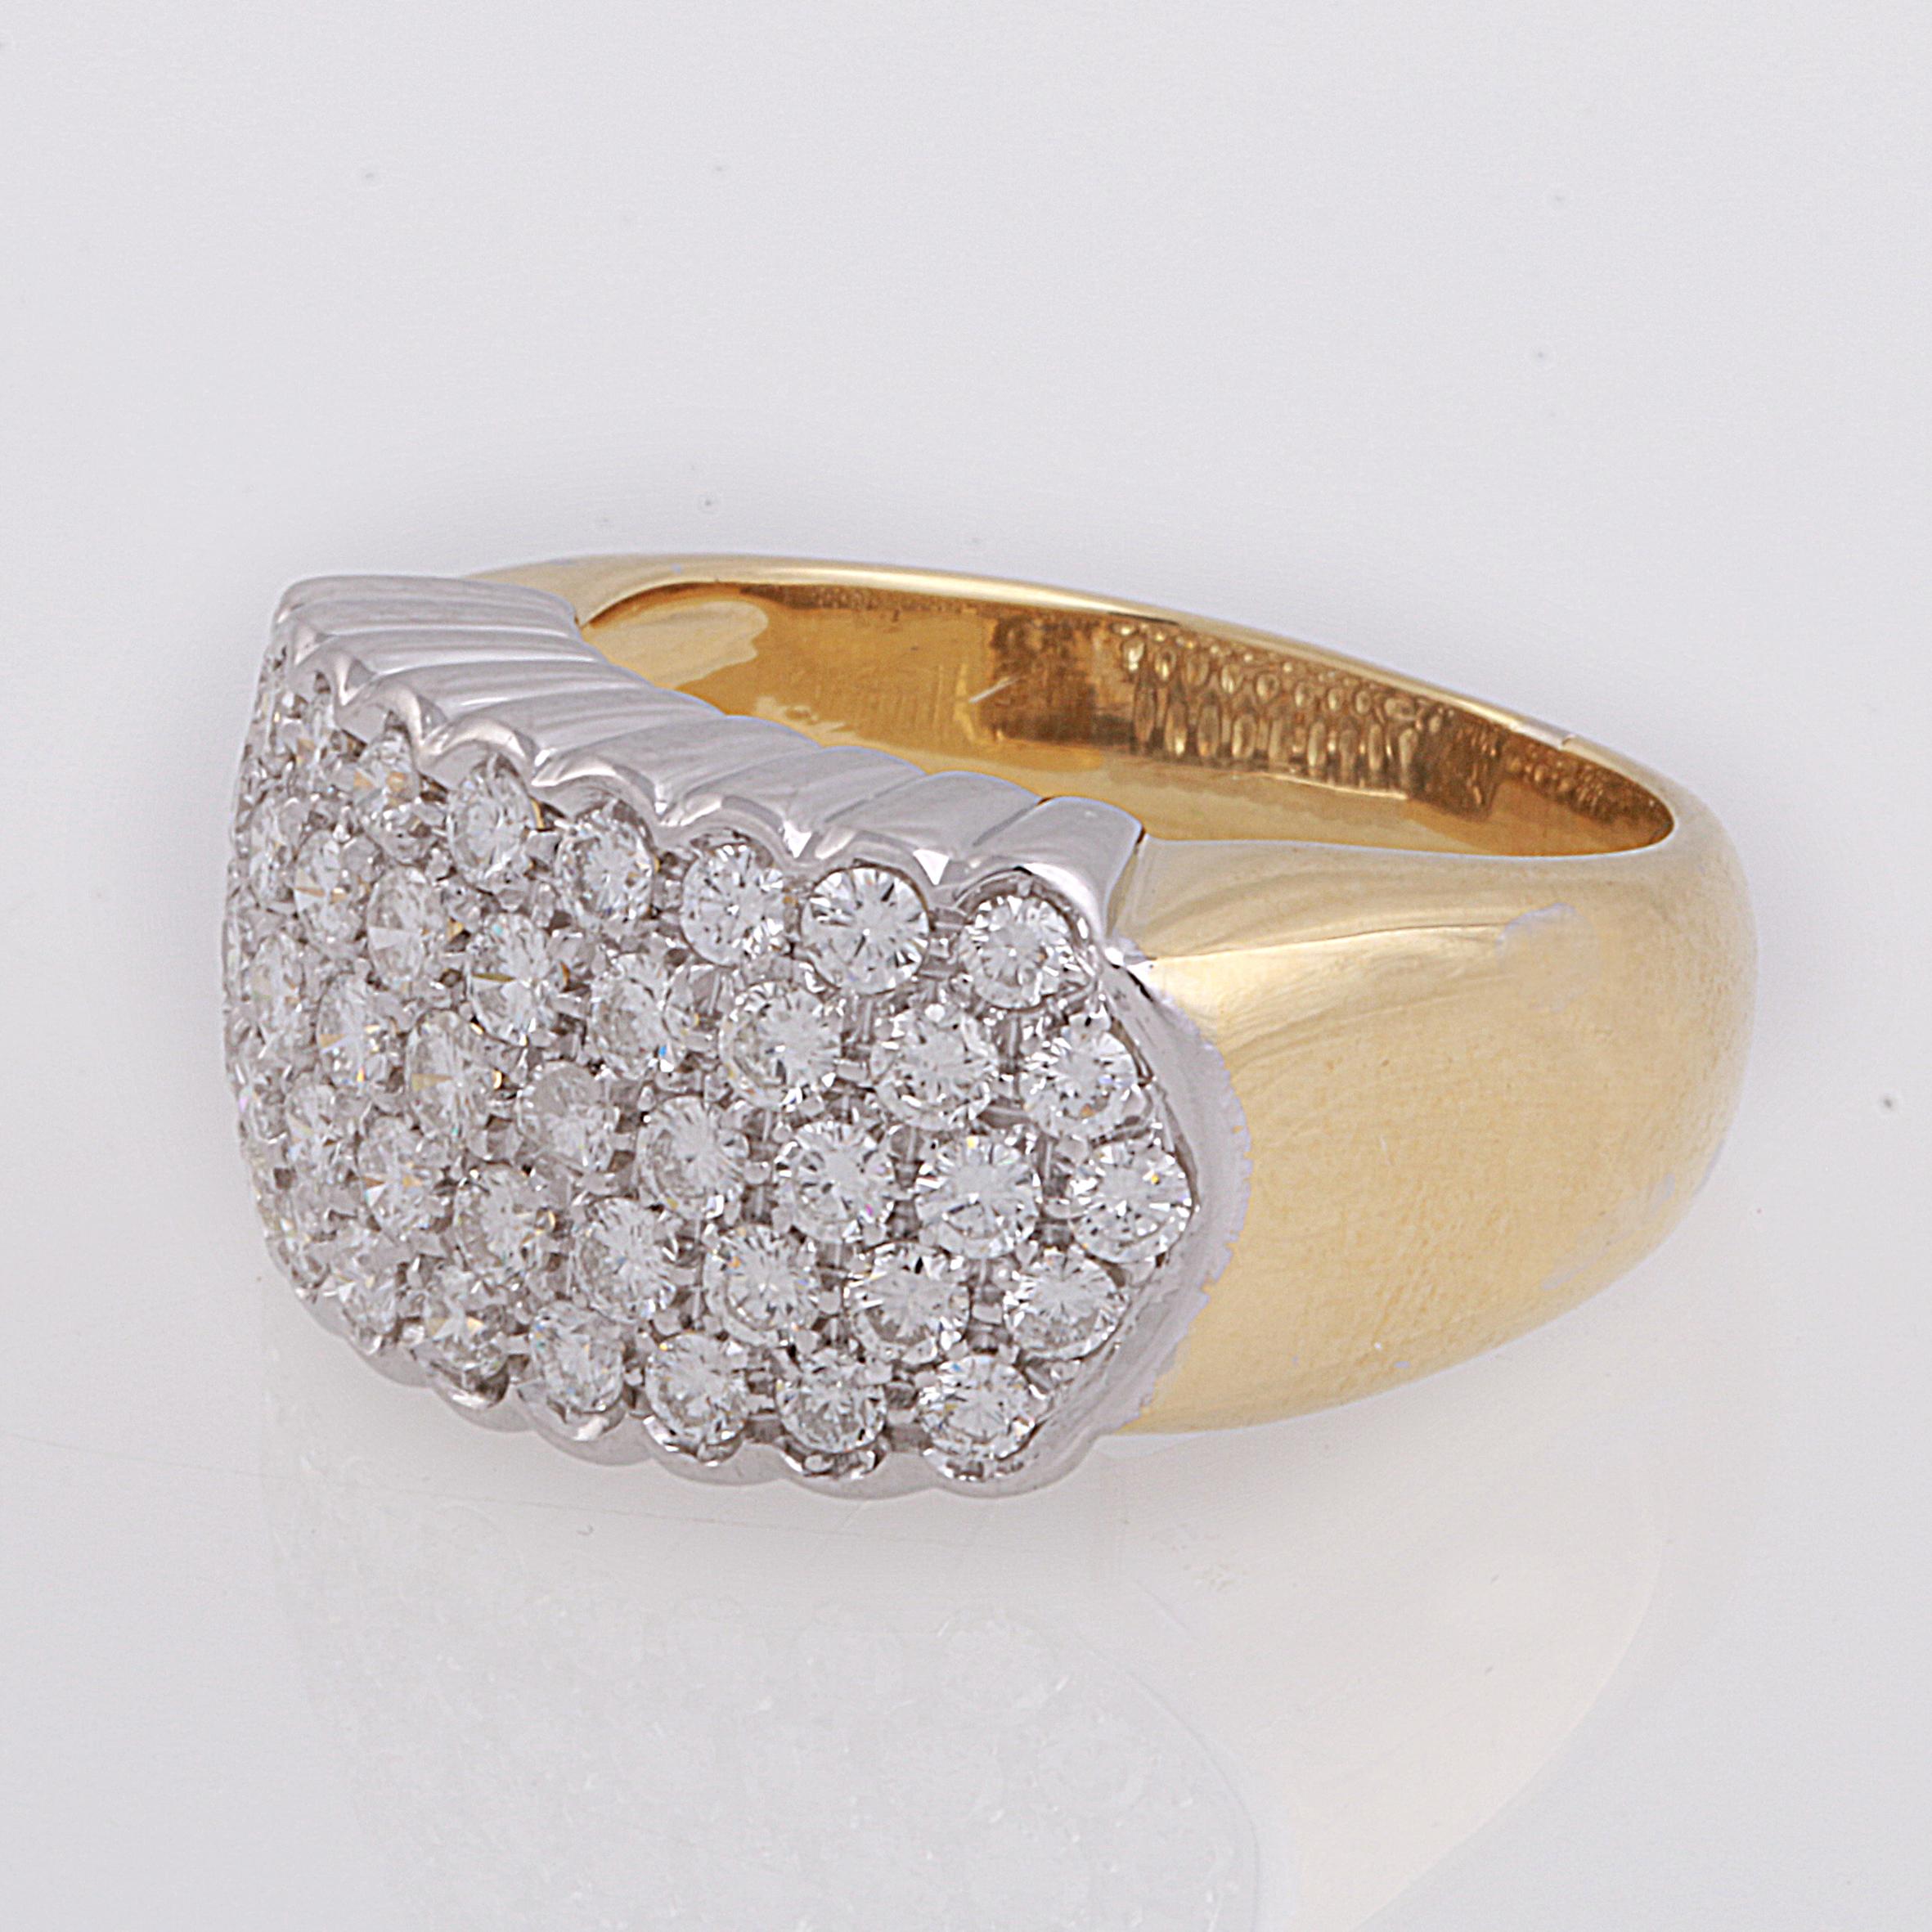 Contemporary 0.70 Carat Pavé Set Diamond Band Ring in 18 Karat Yellow and White Gold